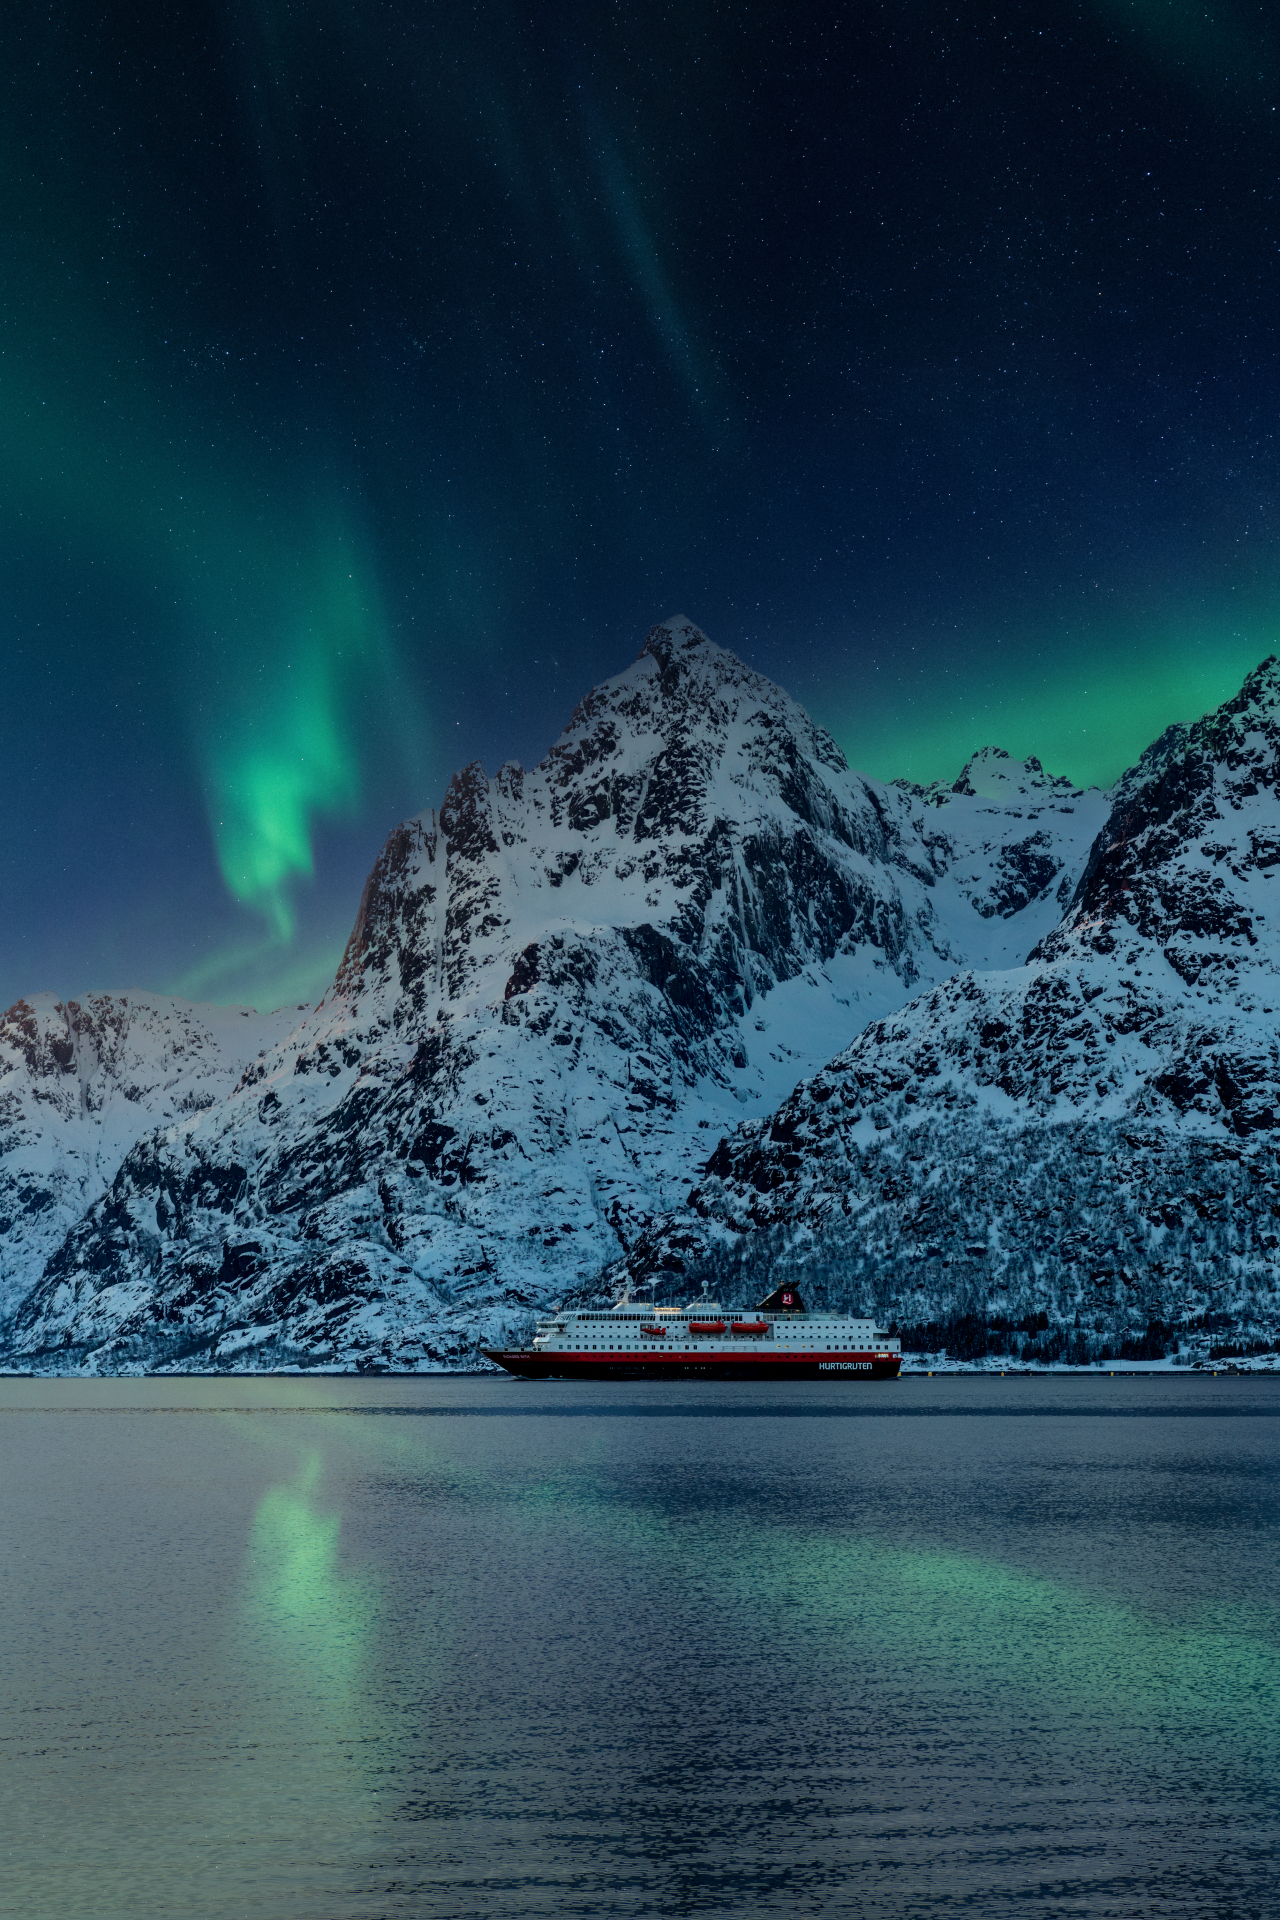 hurtigruten ship under the northern lights with tall mountains in the background.